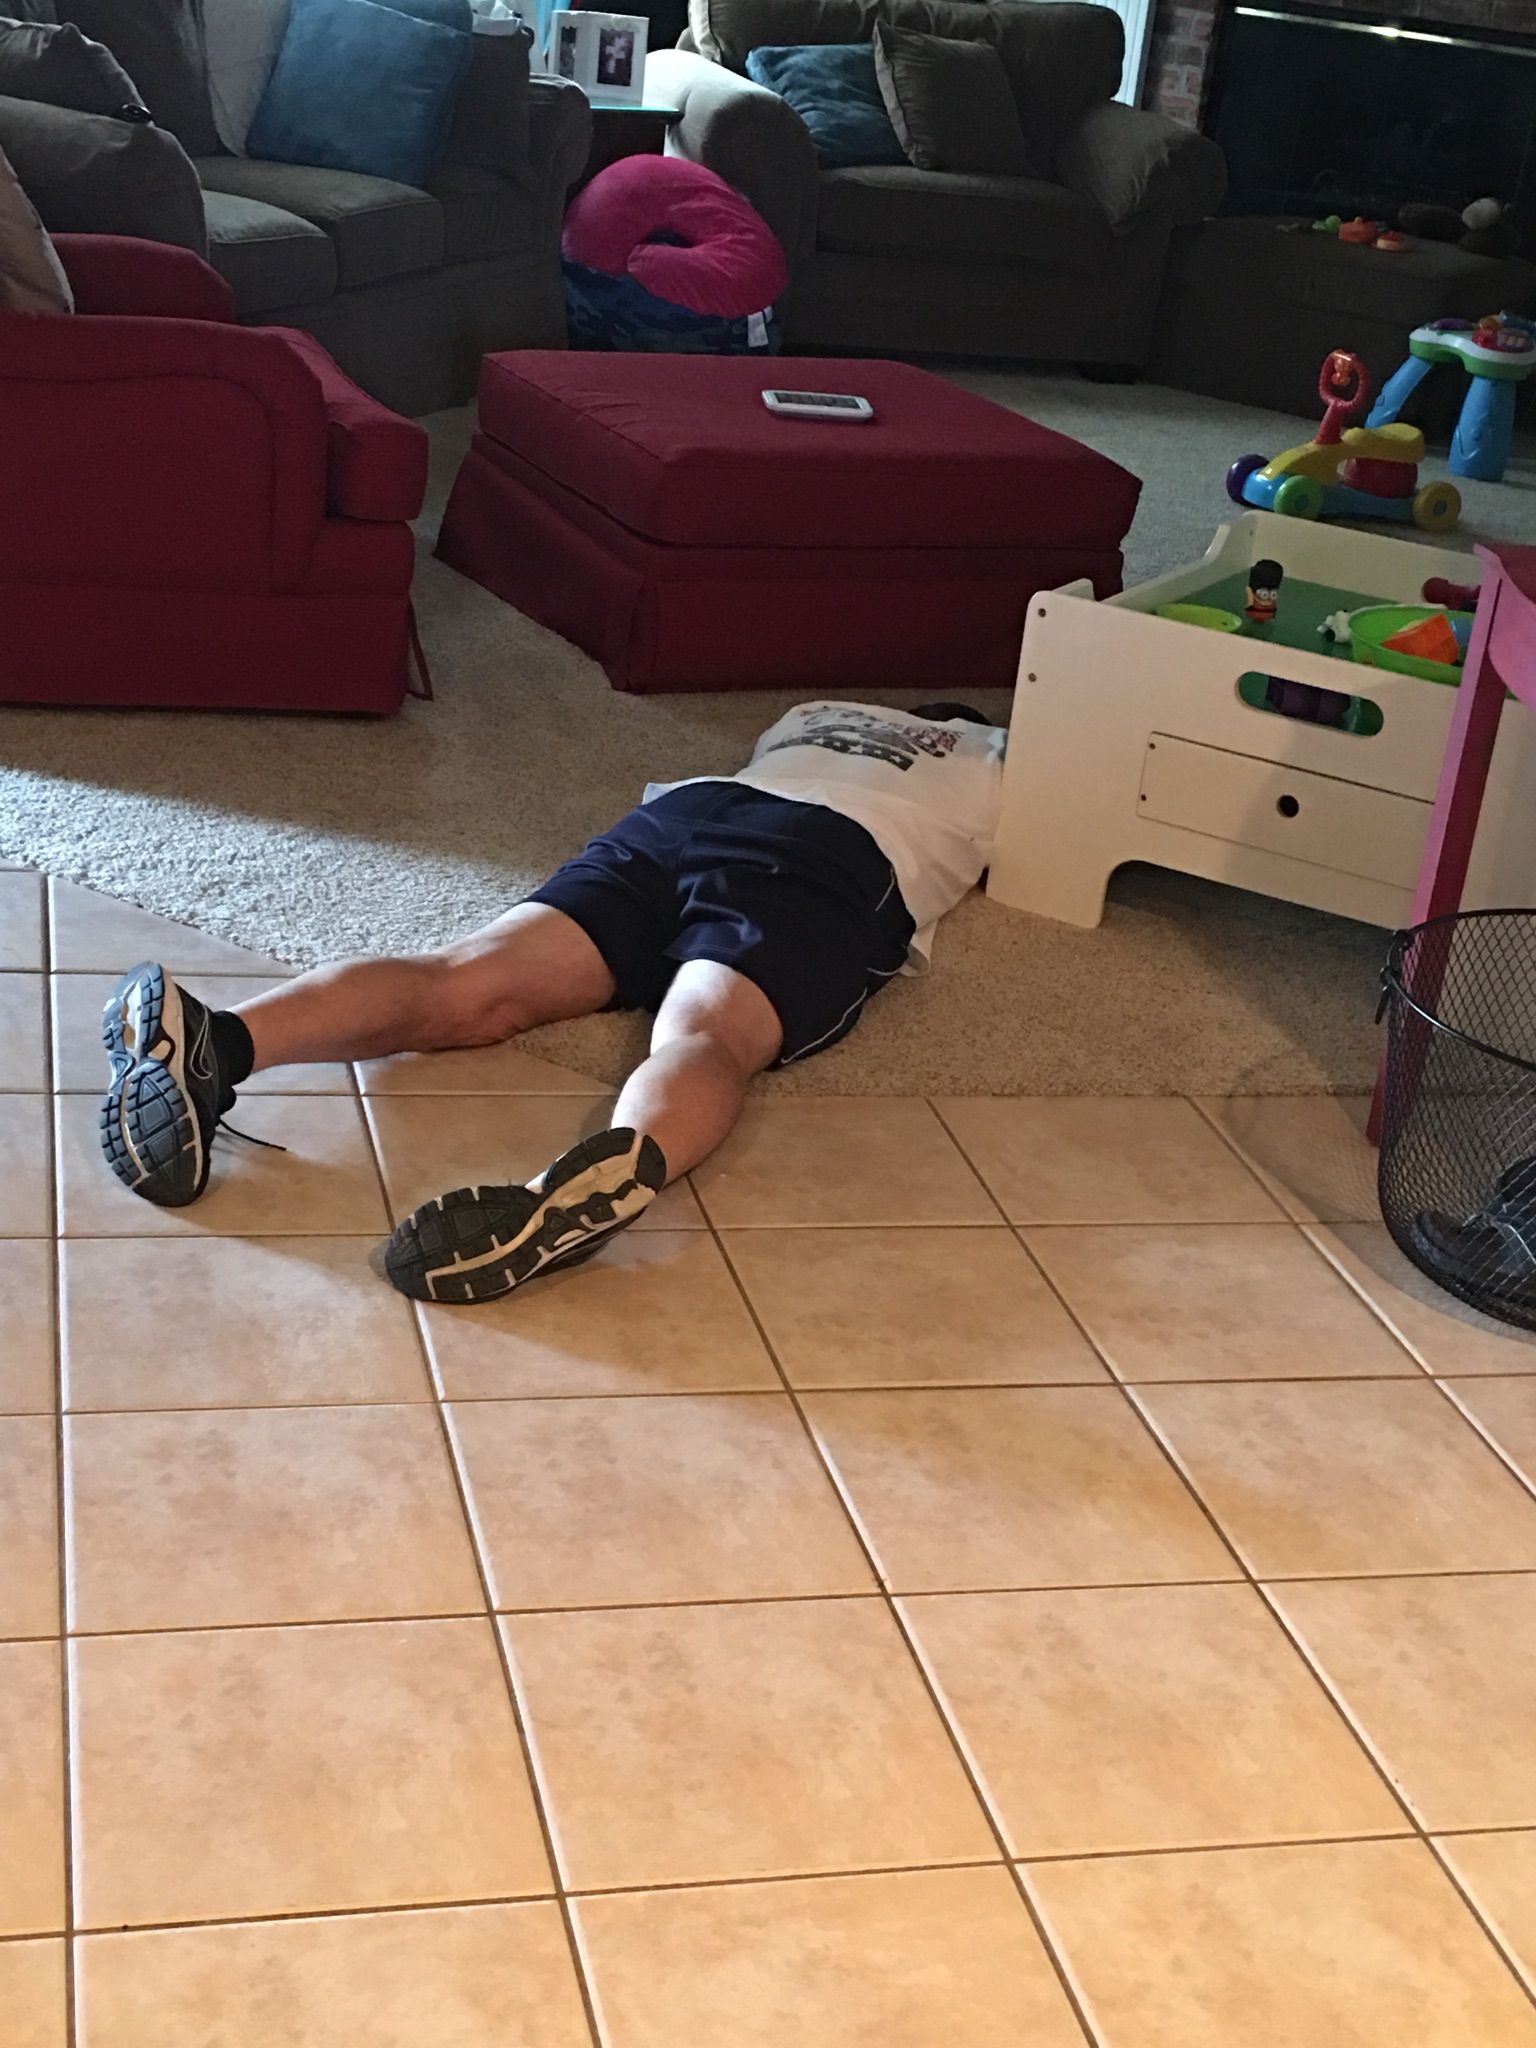 My dad was gonna go for a run. He laid down to stretch his back. Found him asleep 30 minutes later.